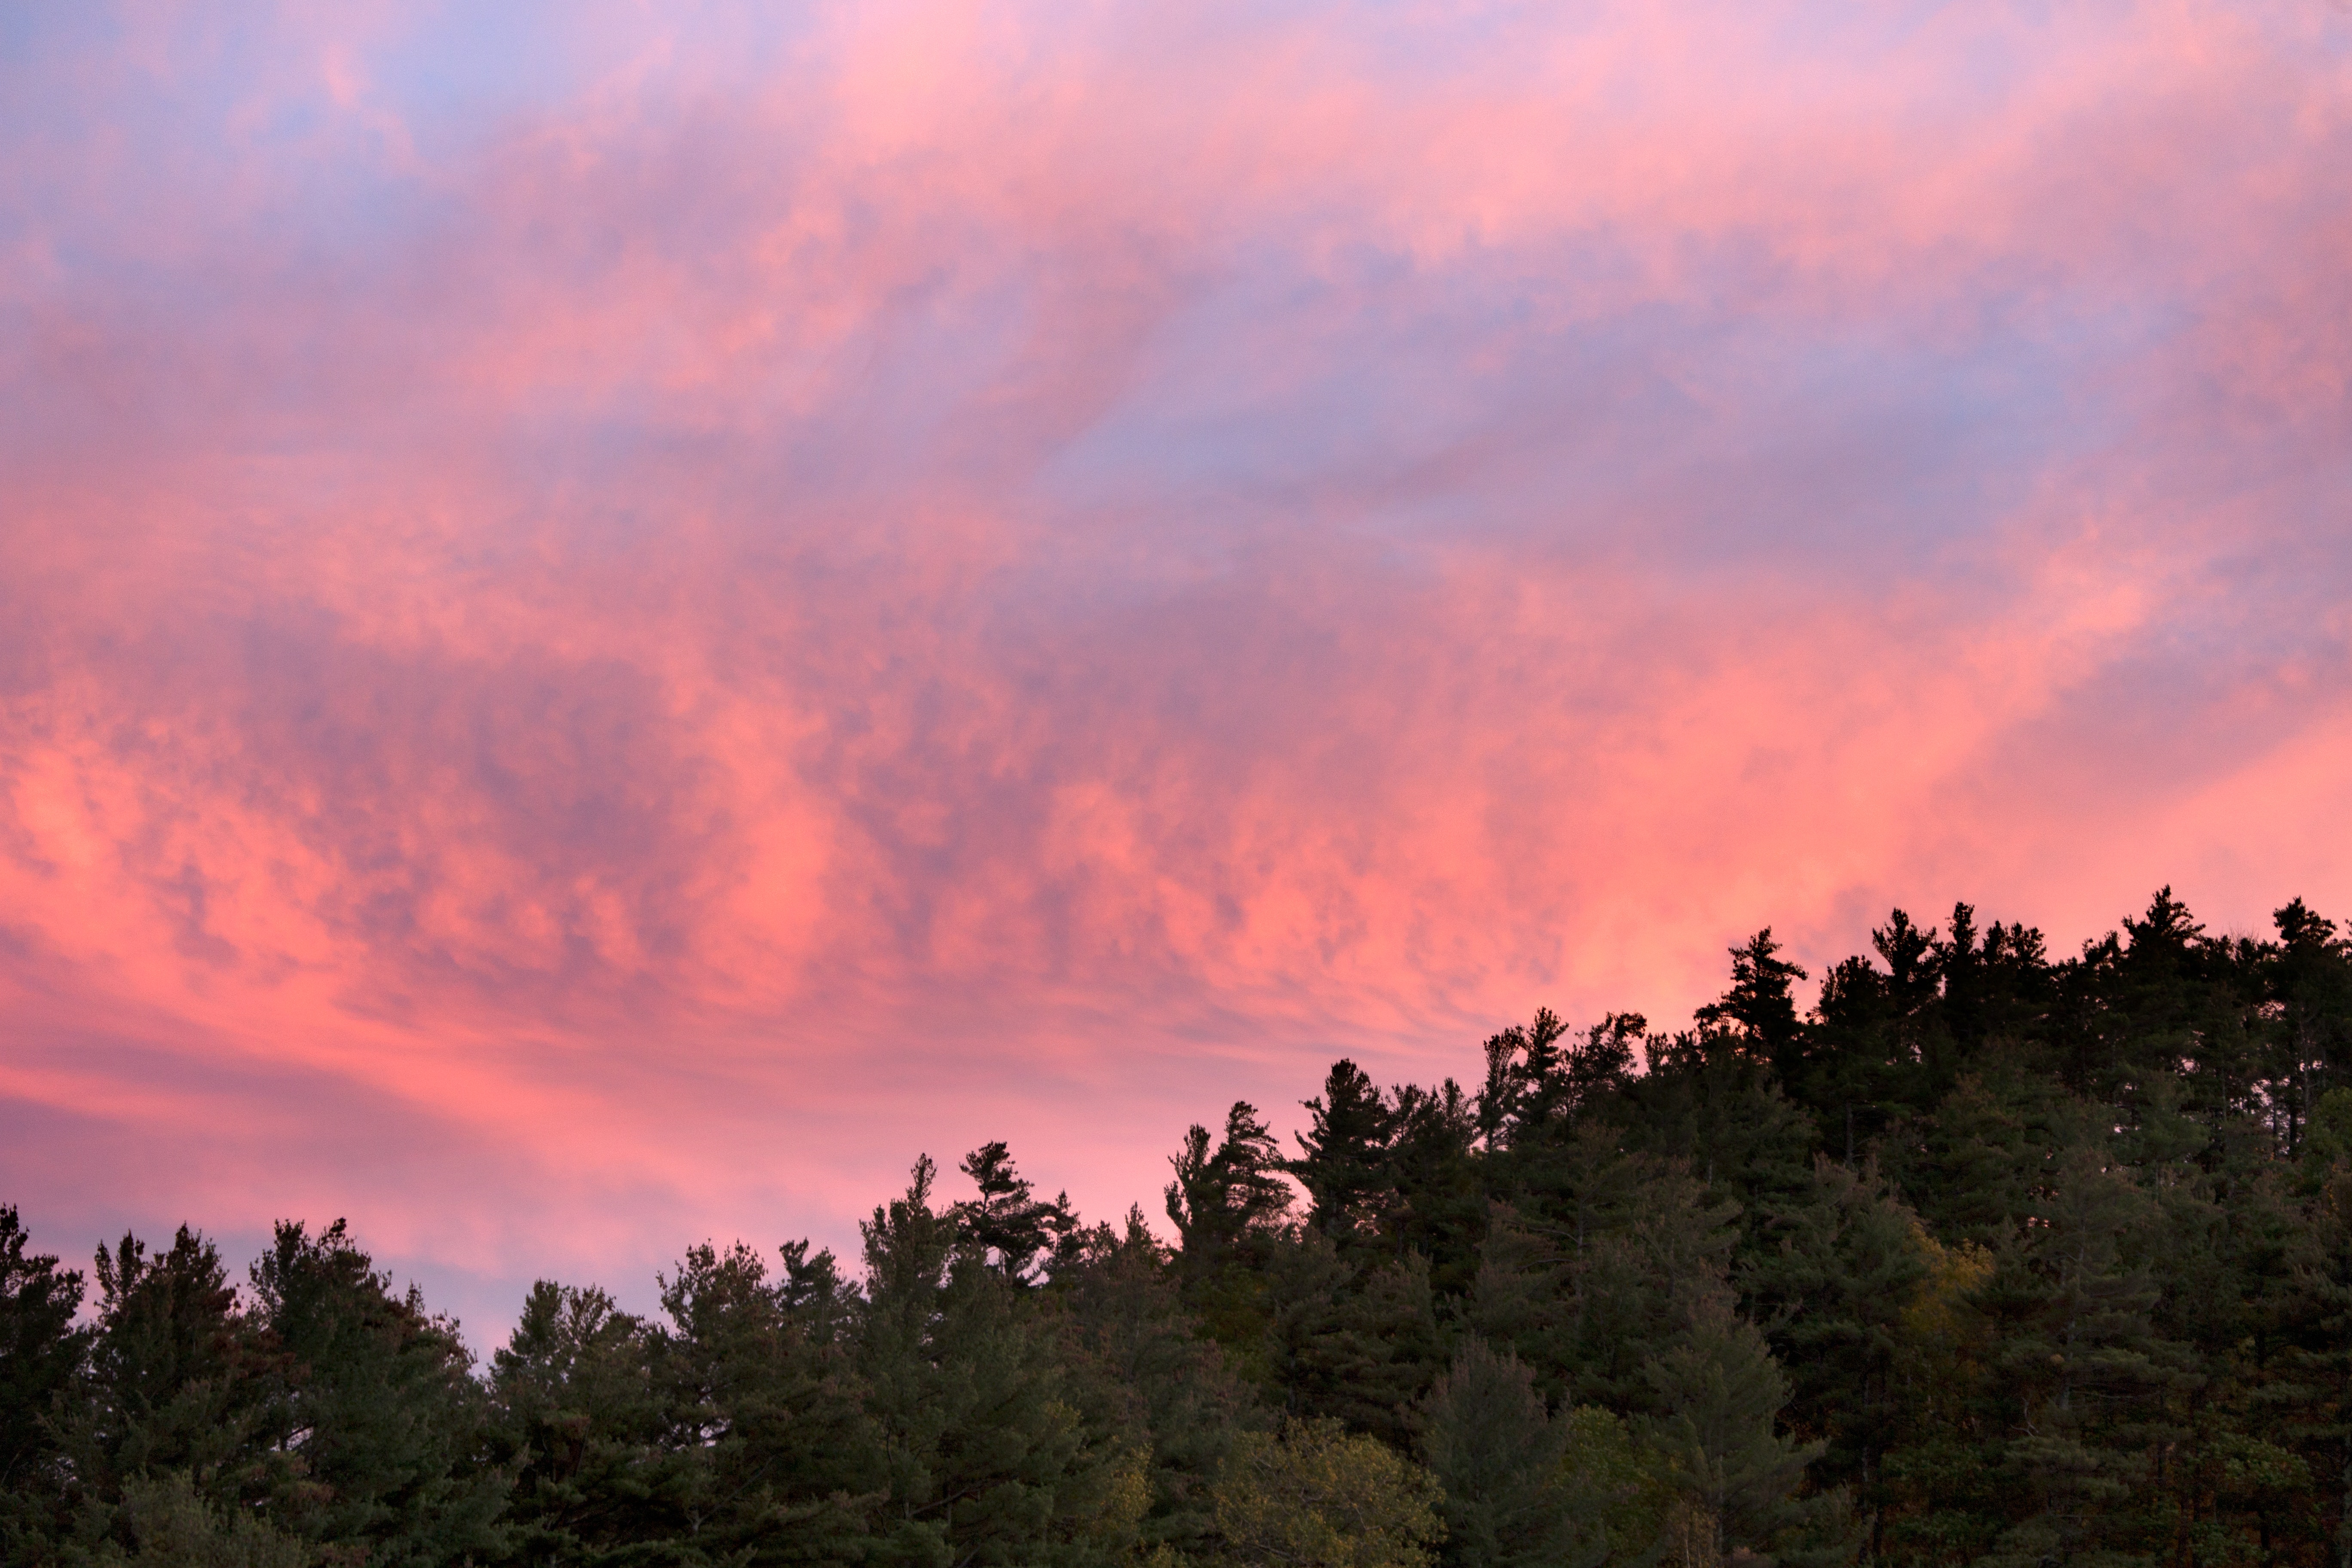 Green forest trees under pink and blue sky during sunset photo